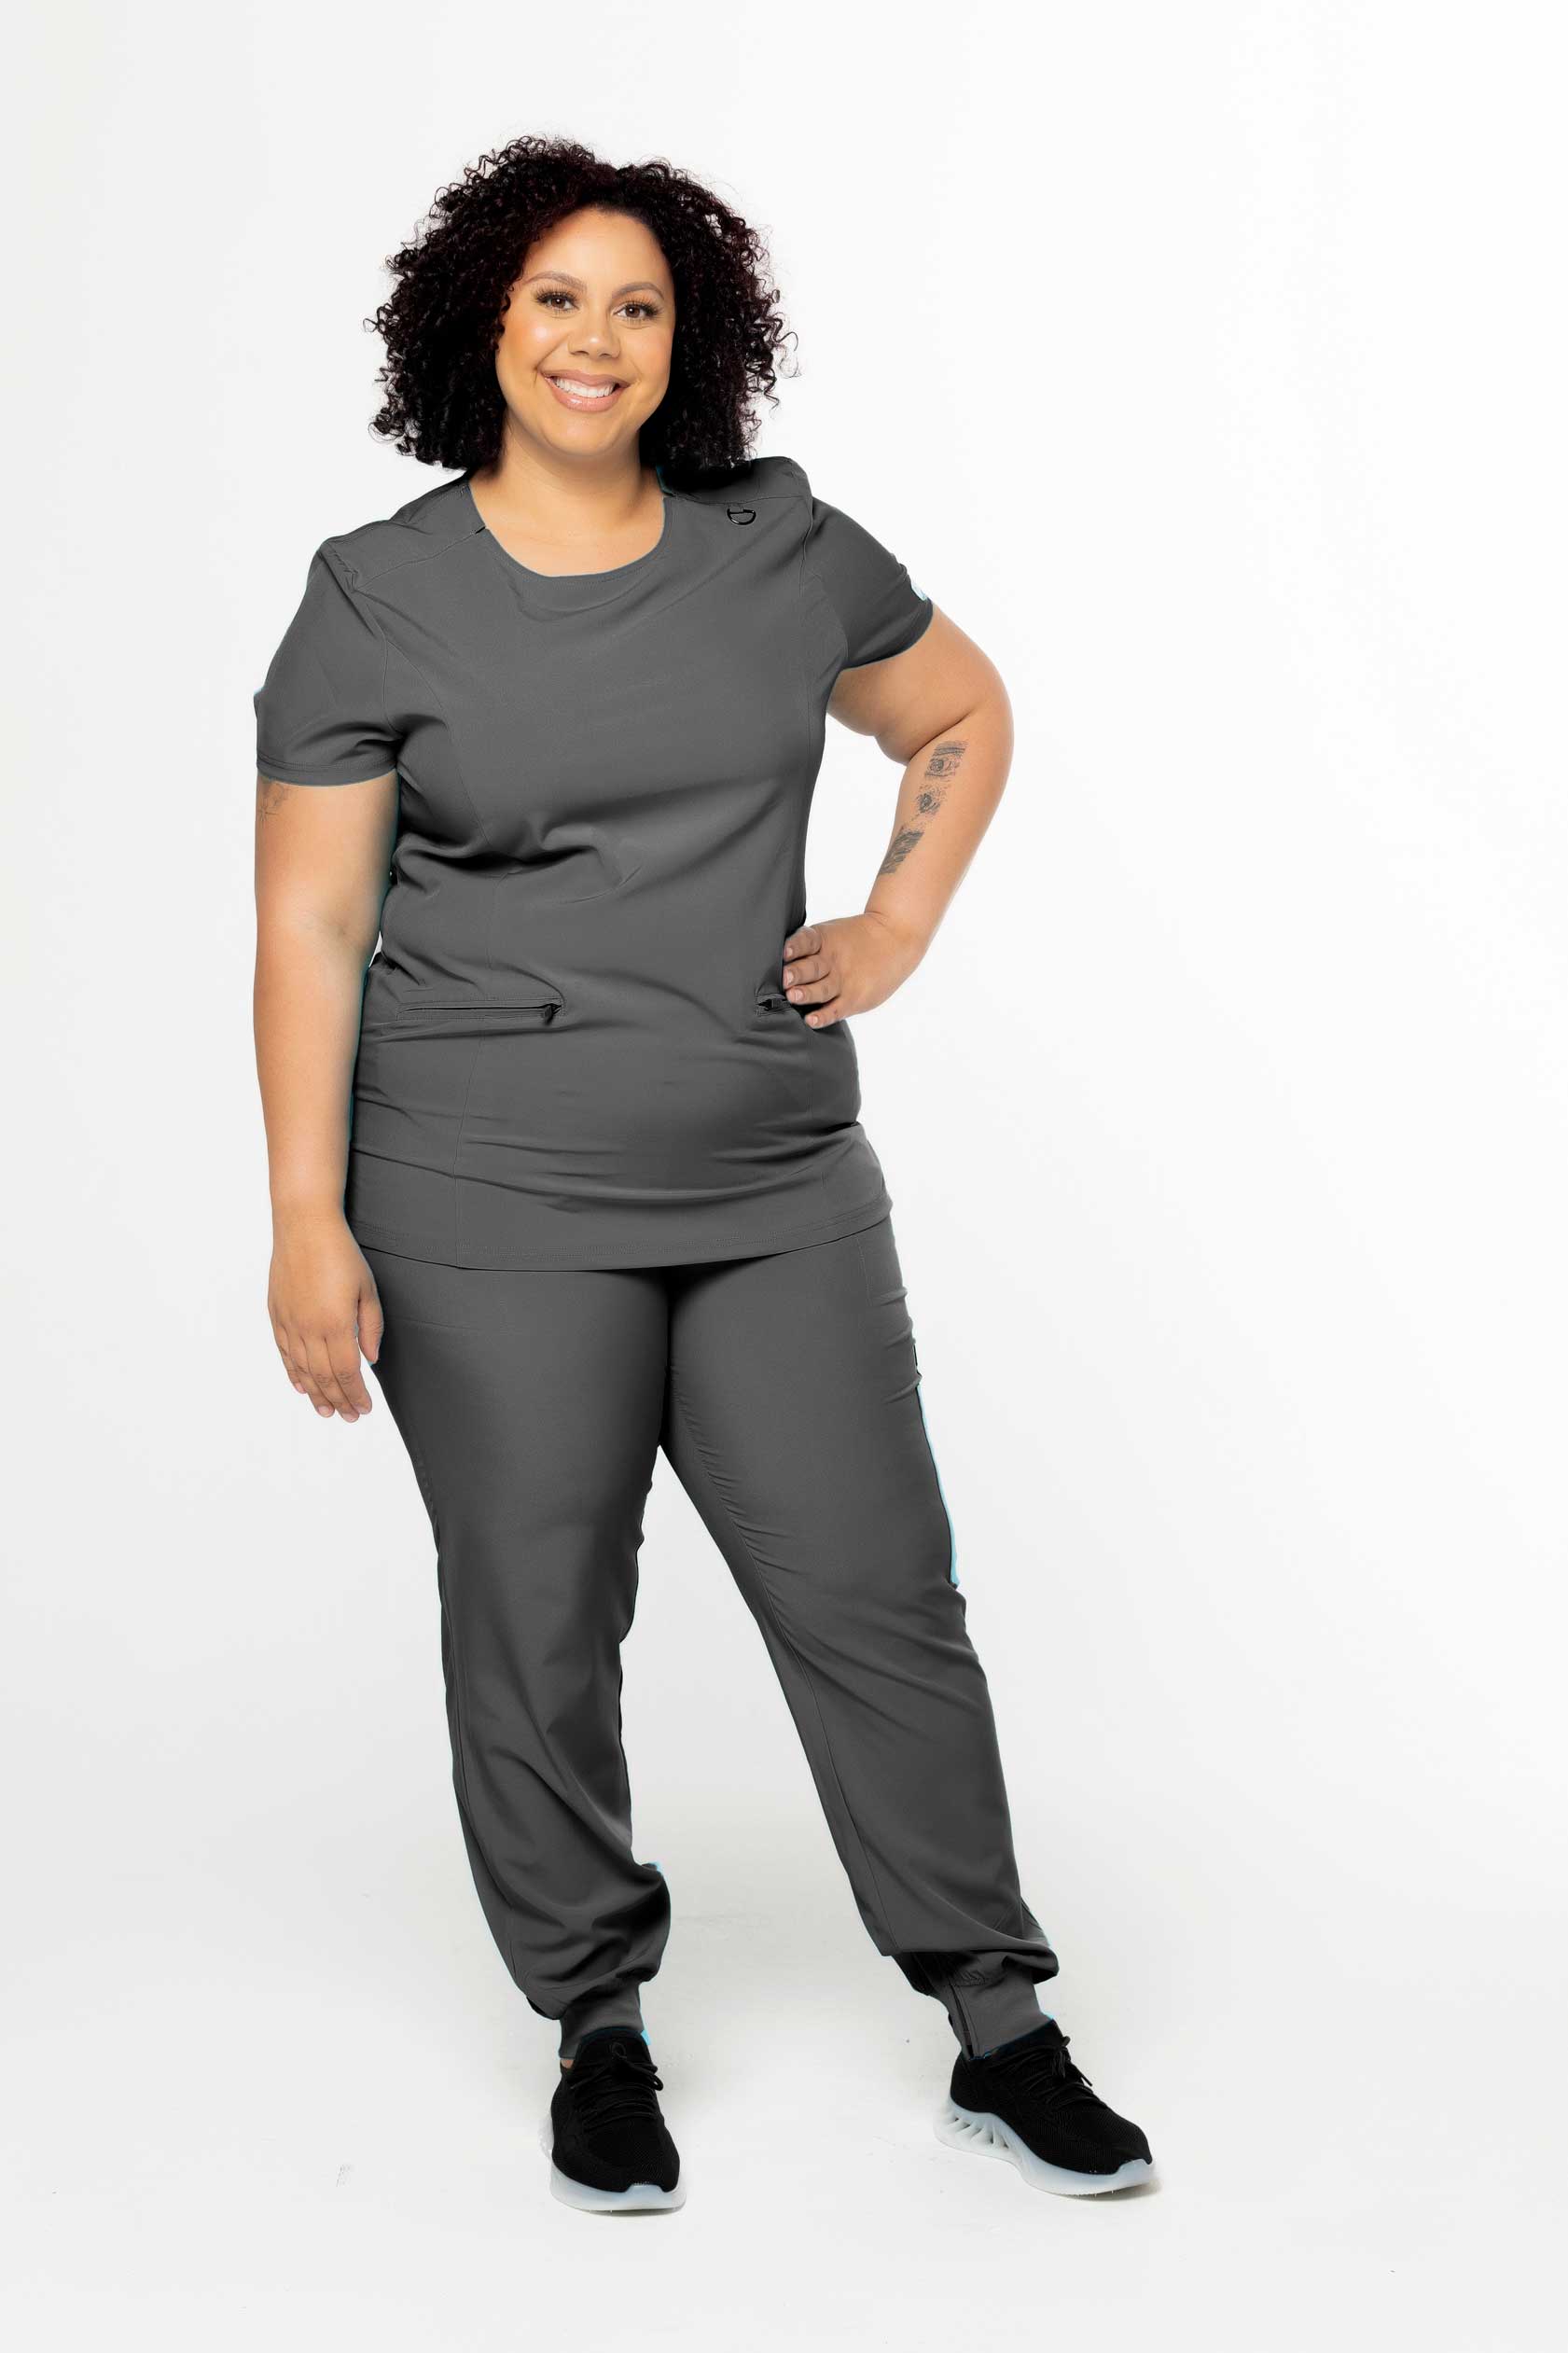 PURCHASE A SAMPLE SET (MATCHING TOP AND BOTTOM) - THE CSCRUBS COMFORT COLLECTION